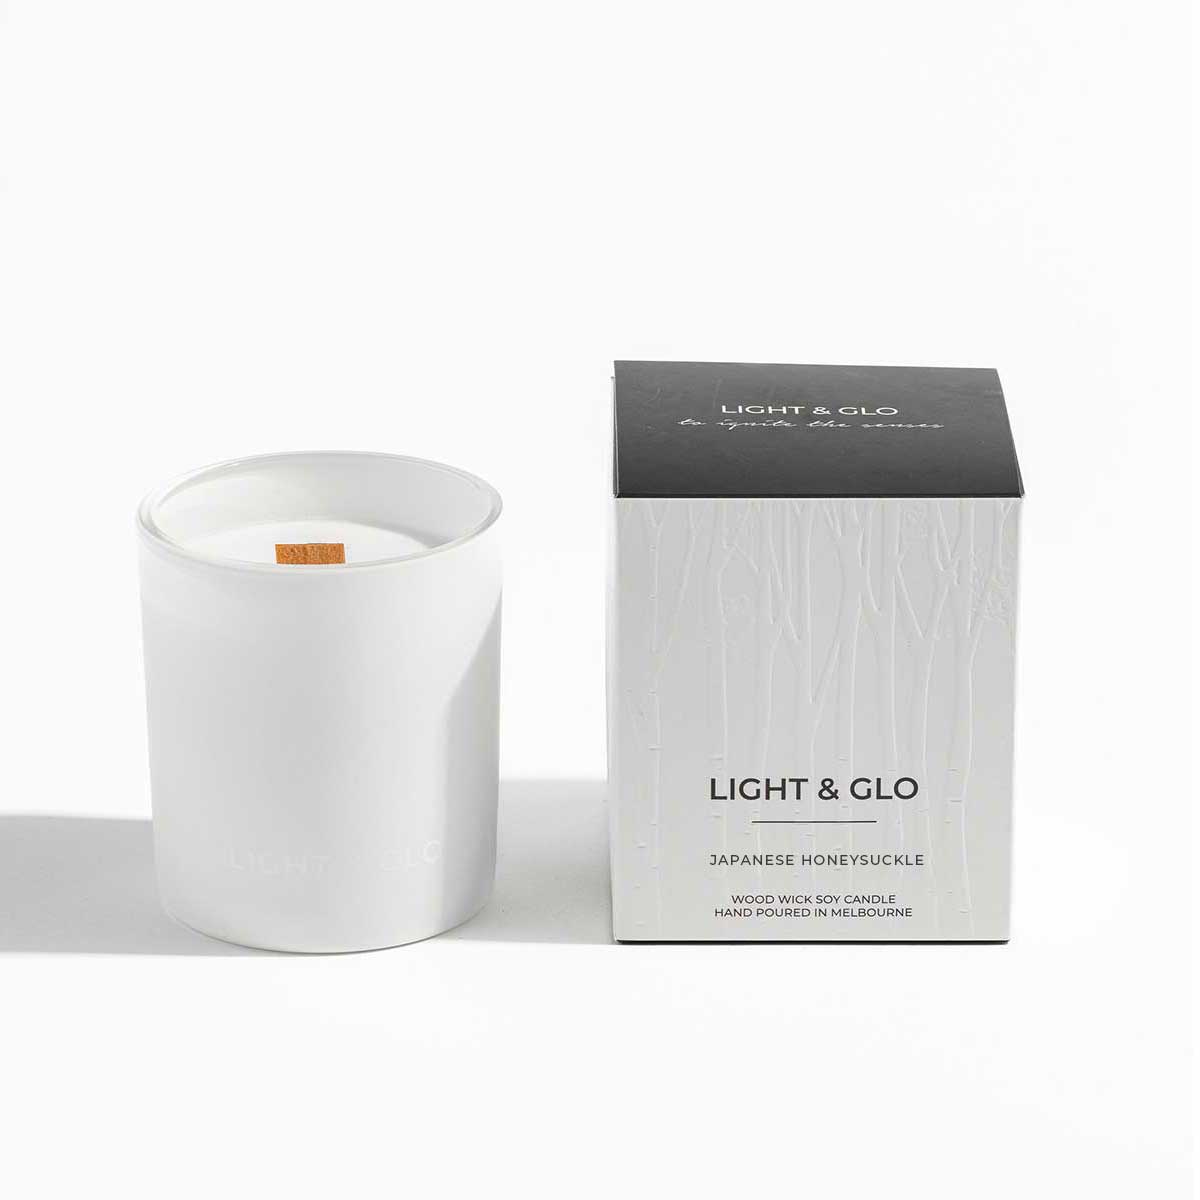 Japanese Honeysuckle - Monochrome Large 300g Candle | Luxury Candles &amp; Home Fragrances by Light + Glo